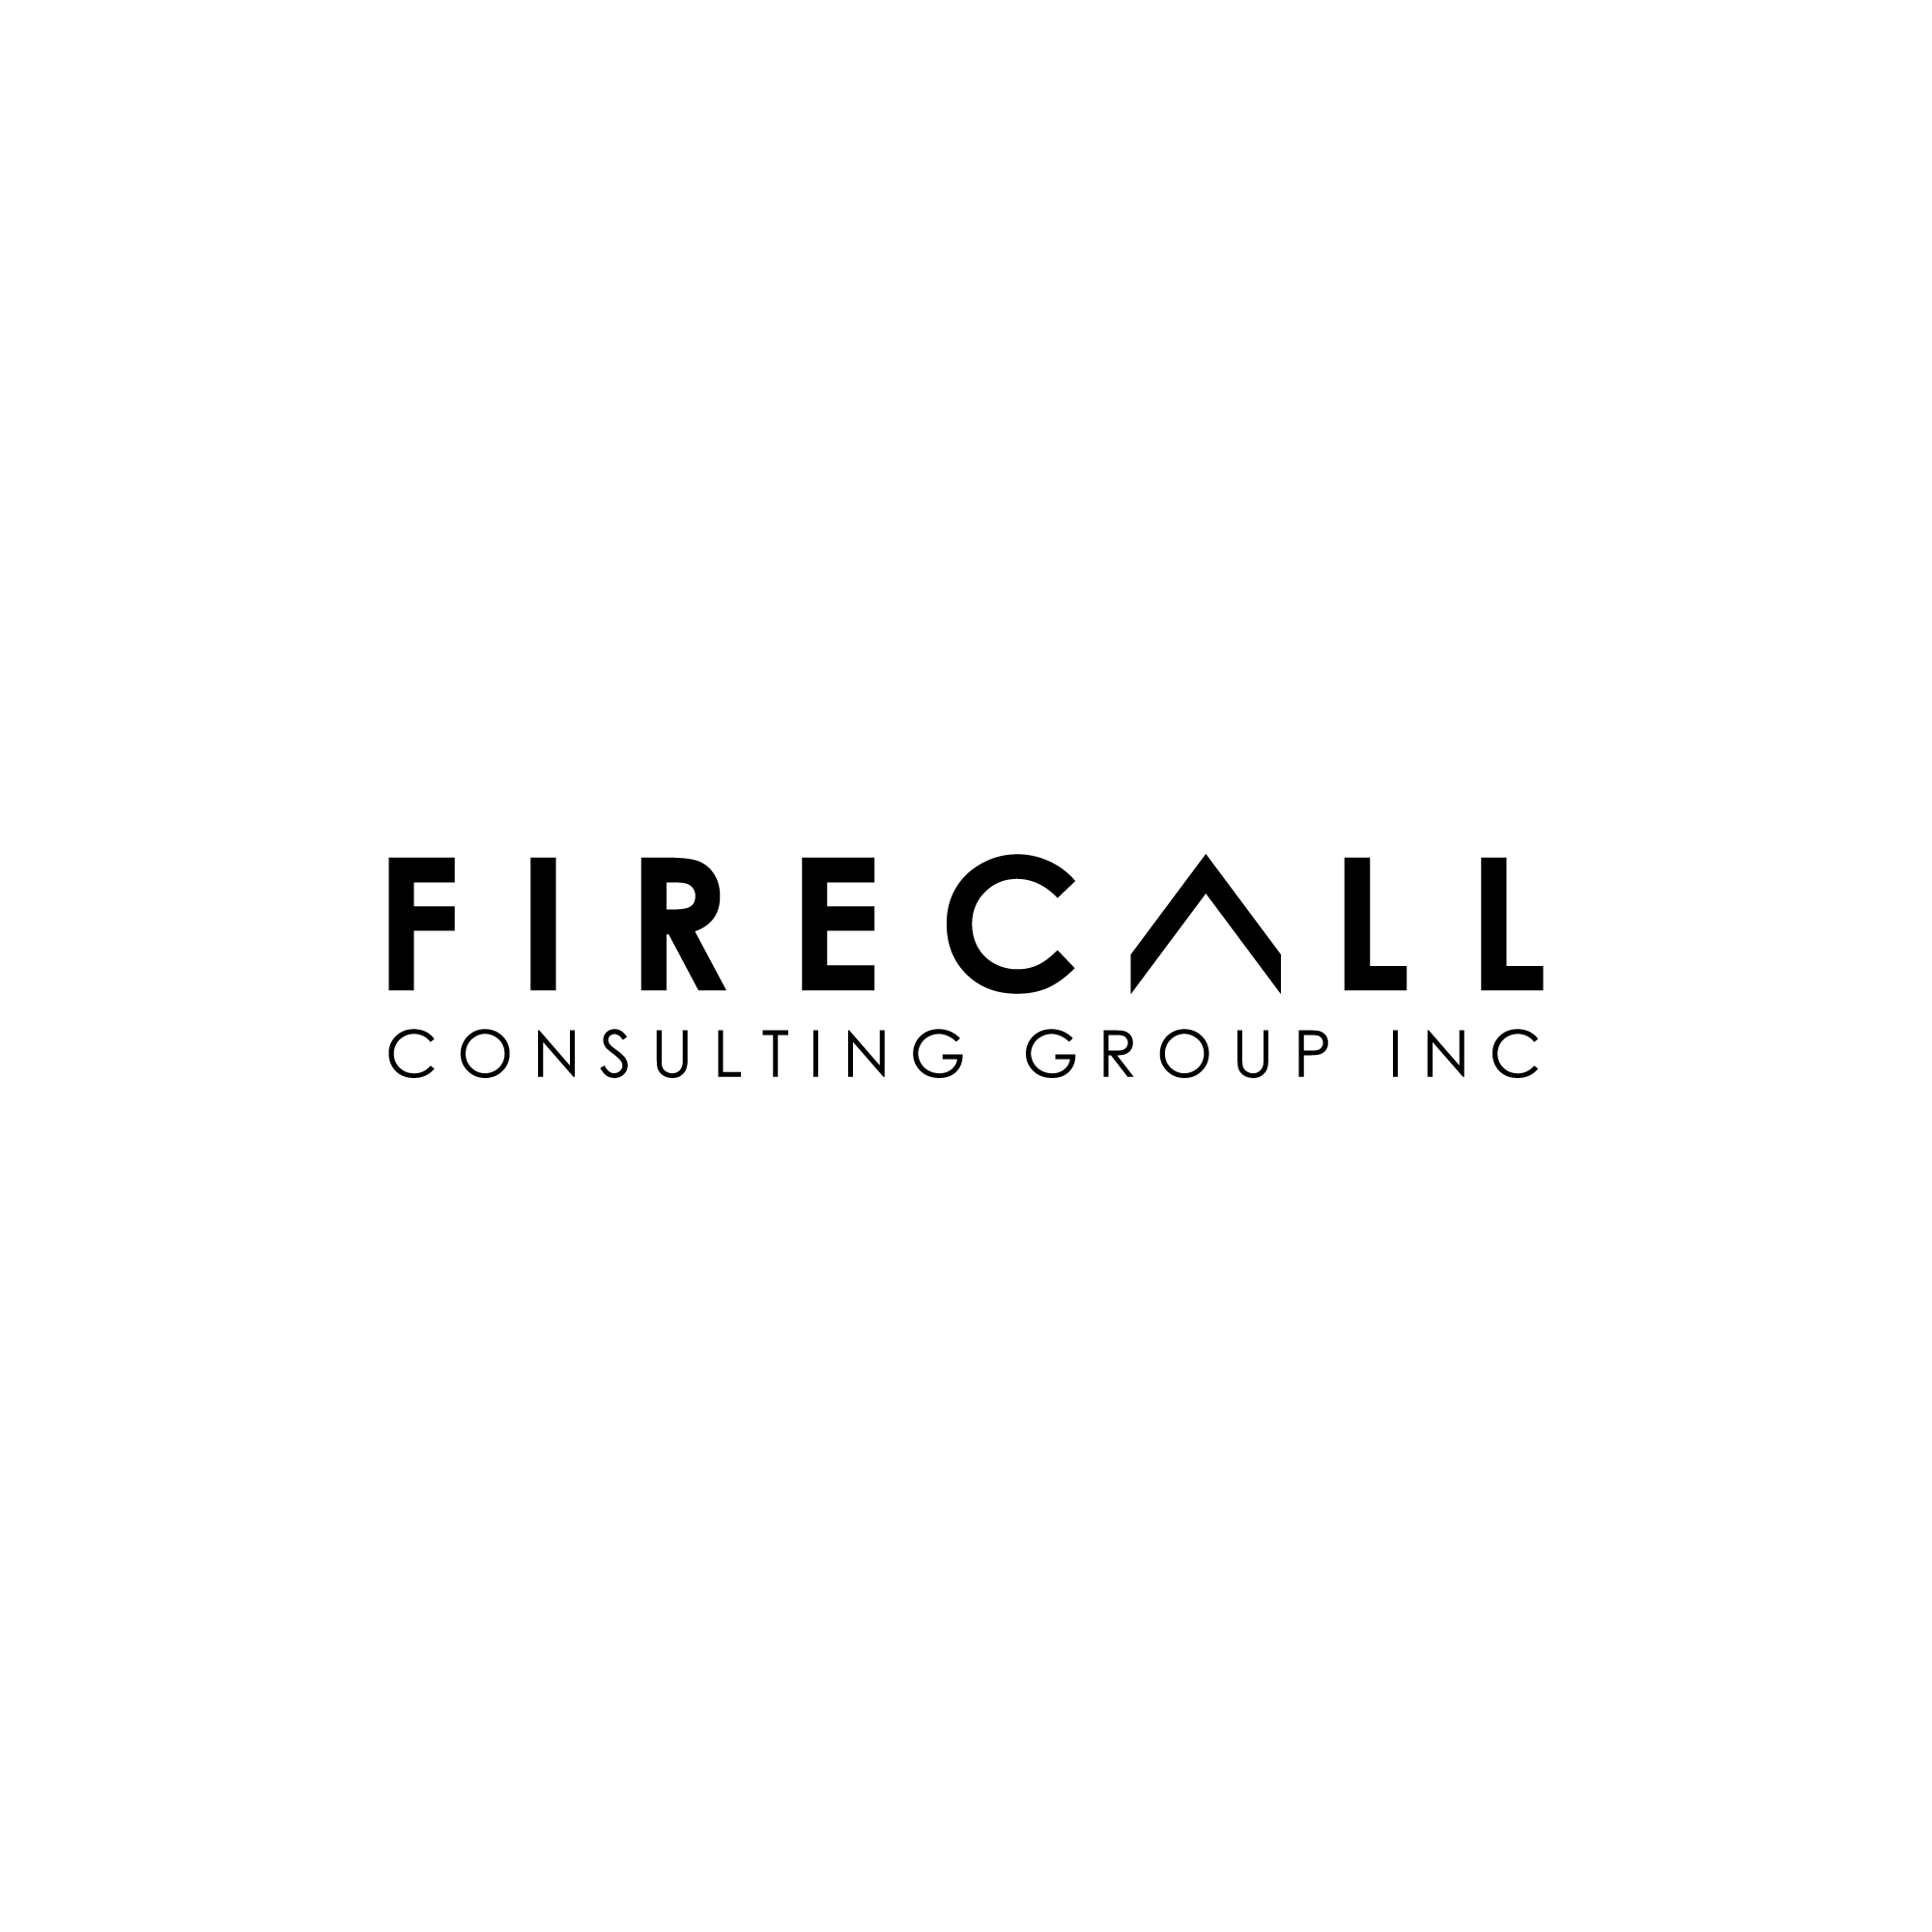 Firecall Consulting Group Inc.